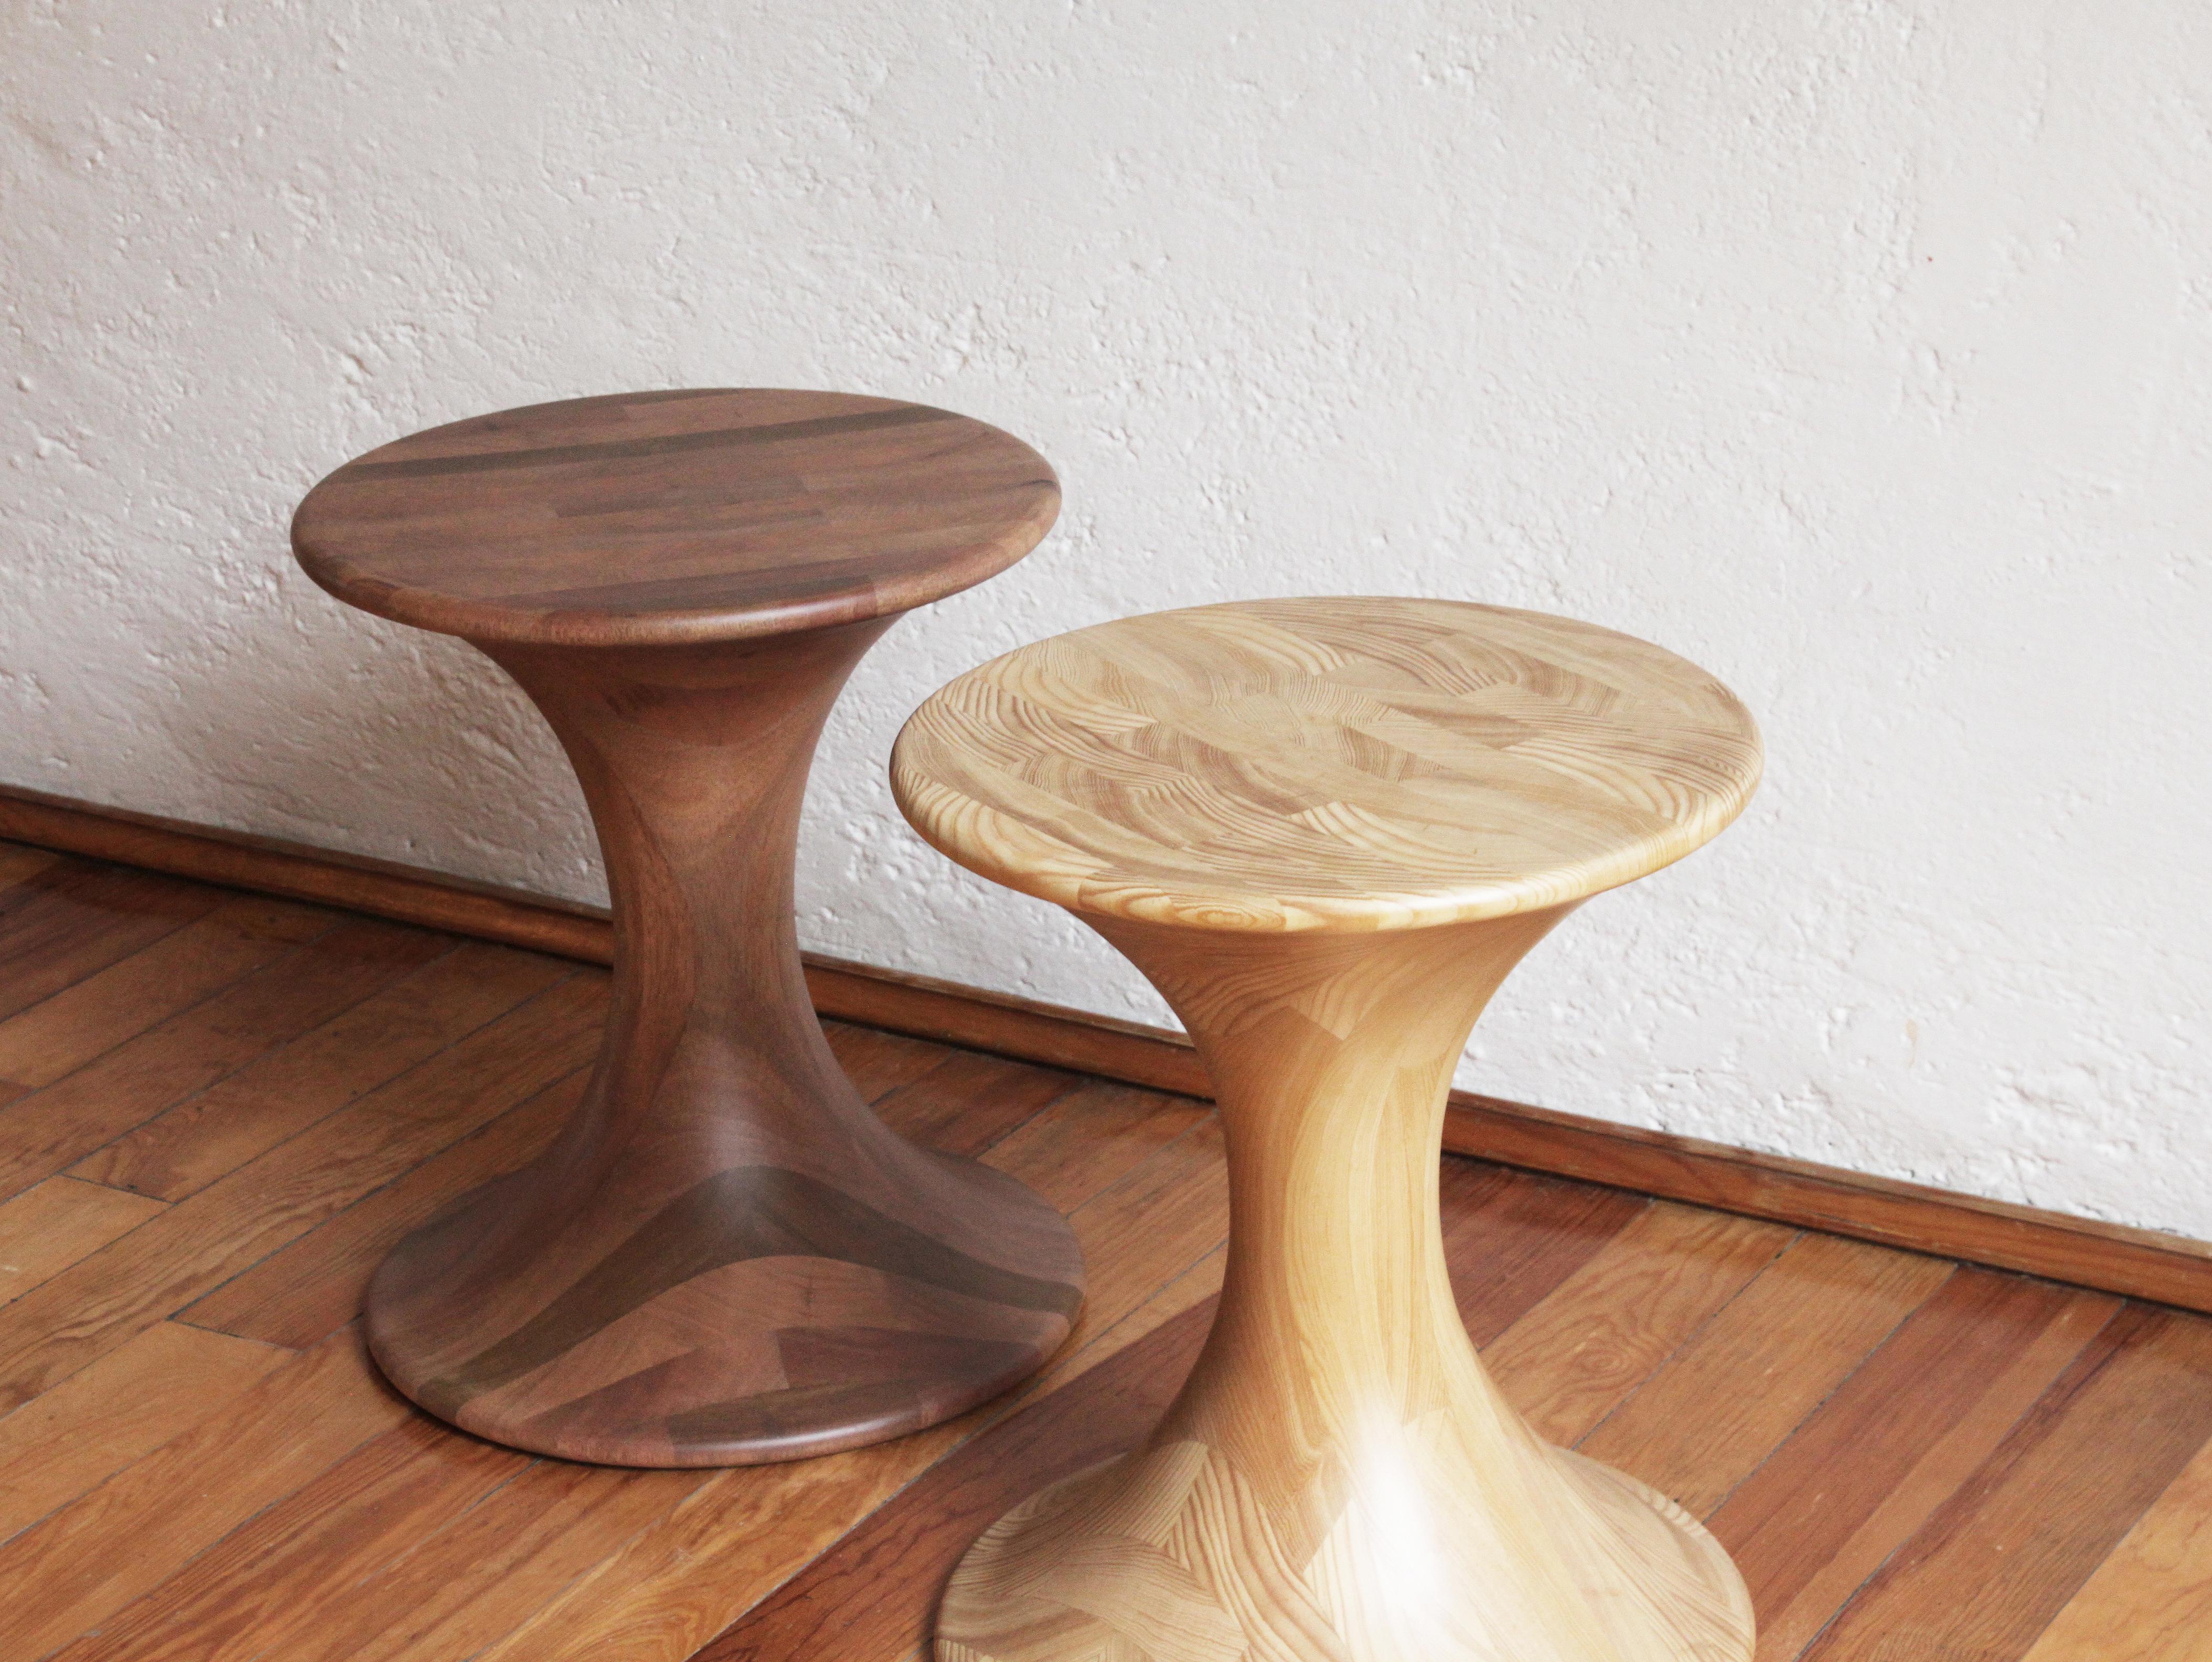 Handcrafted stool by designer Maria Beckmann. Other wood options are available.

  

El Manzano is available in multiple materials:

Types of wood: Solid Spring Wood / Parota / Tzalam / ash / oak / walnut
Types of finishes: Resistant matte varnish &